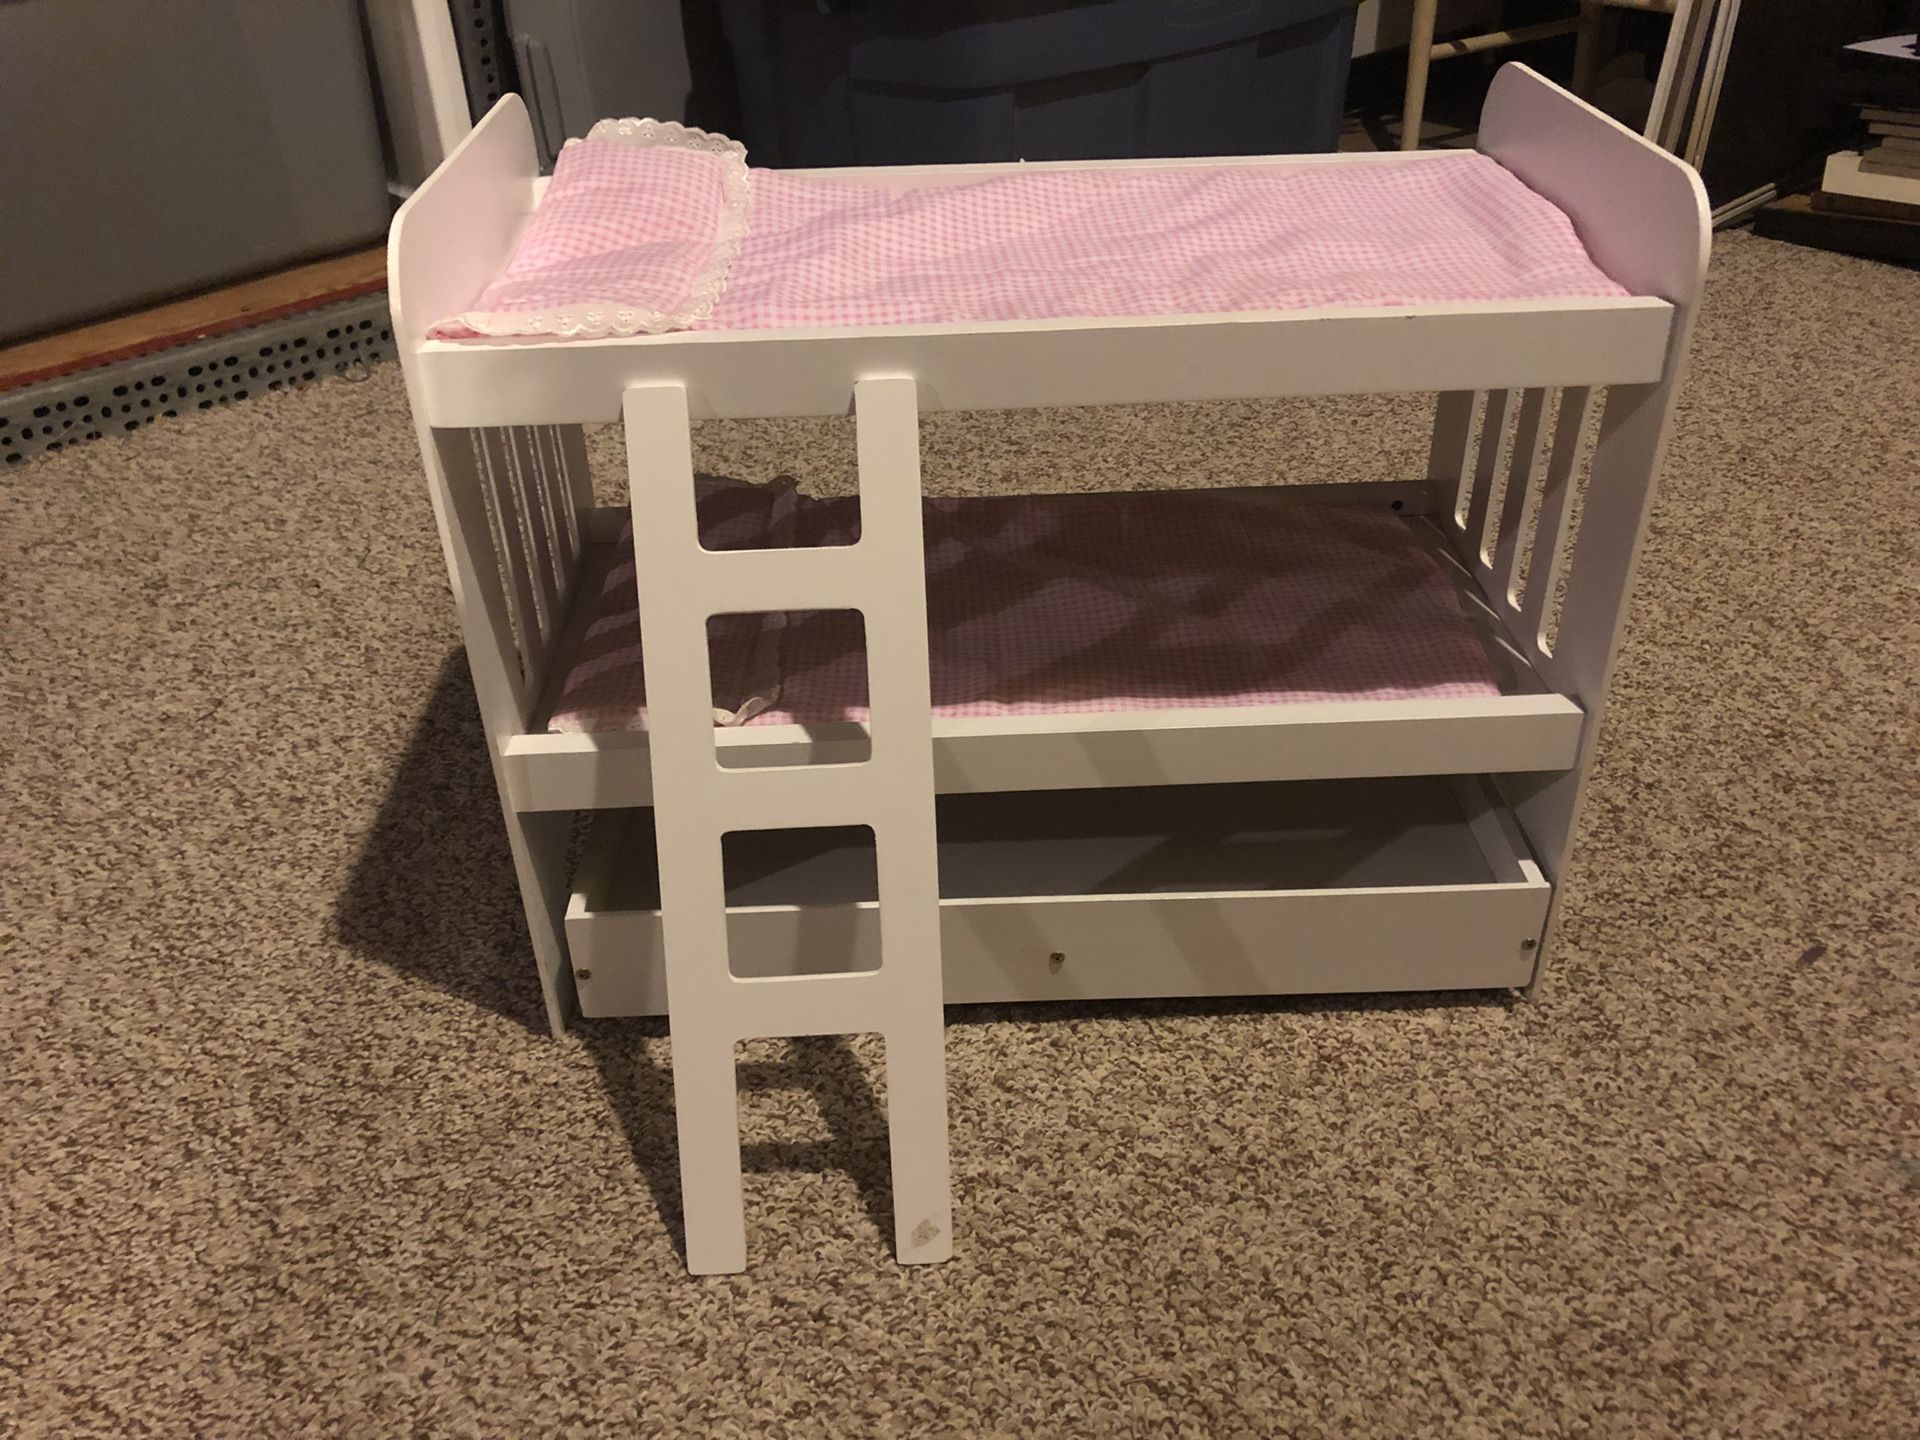 Doll sized bunk bed and trundle, fits American Girl